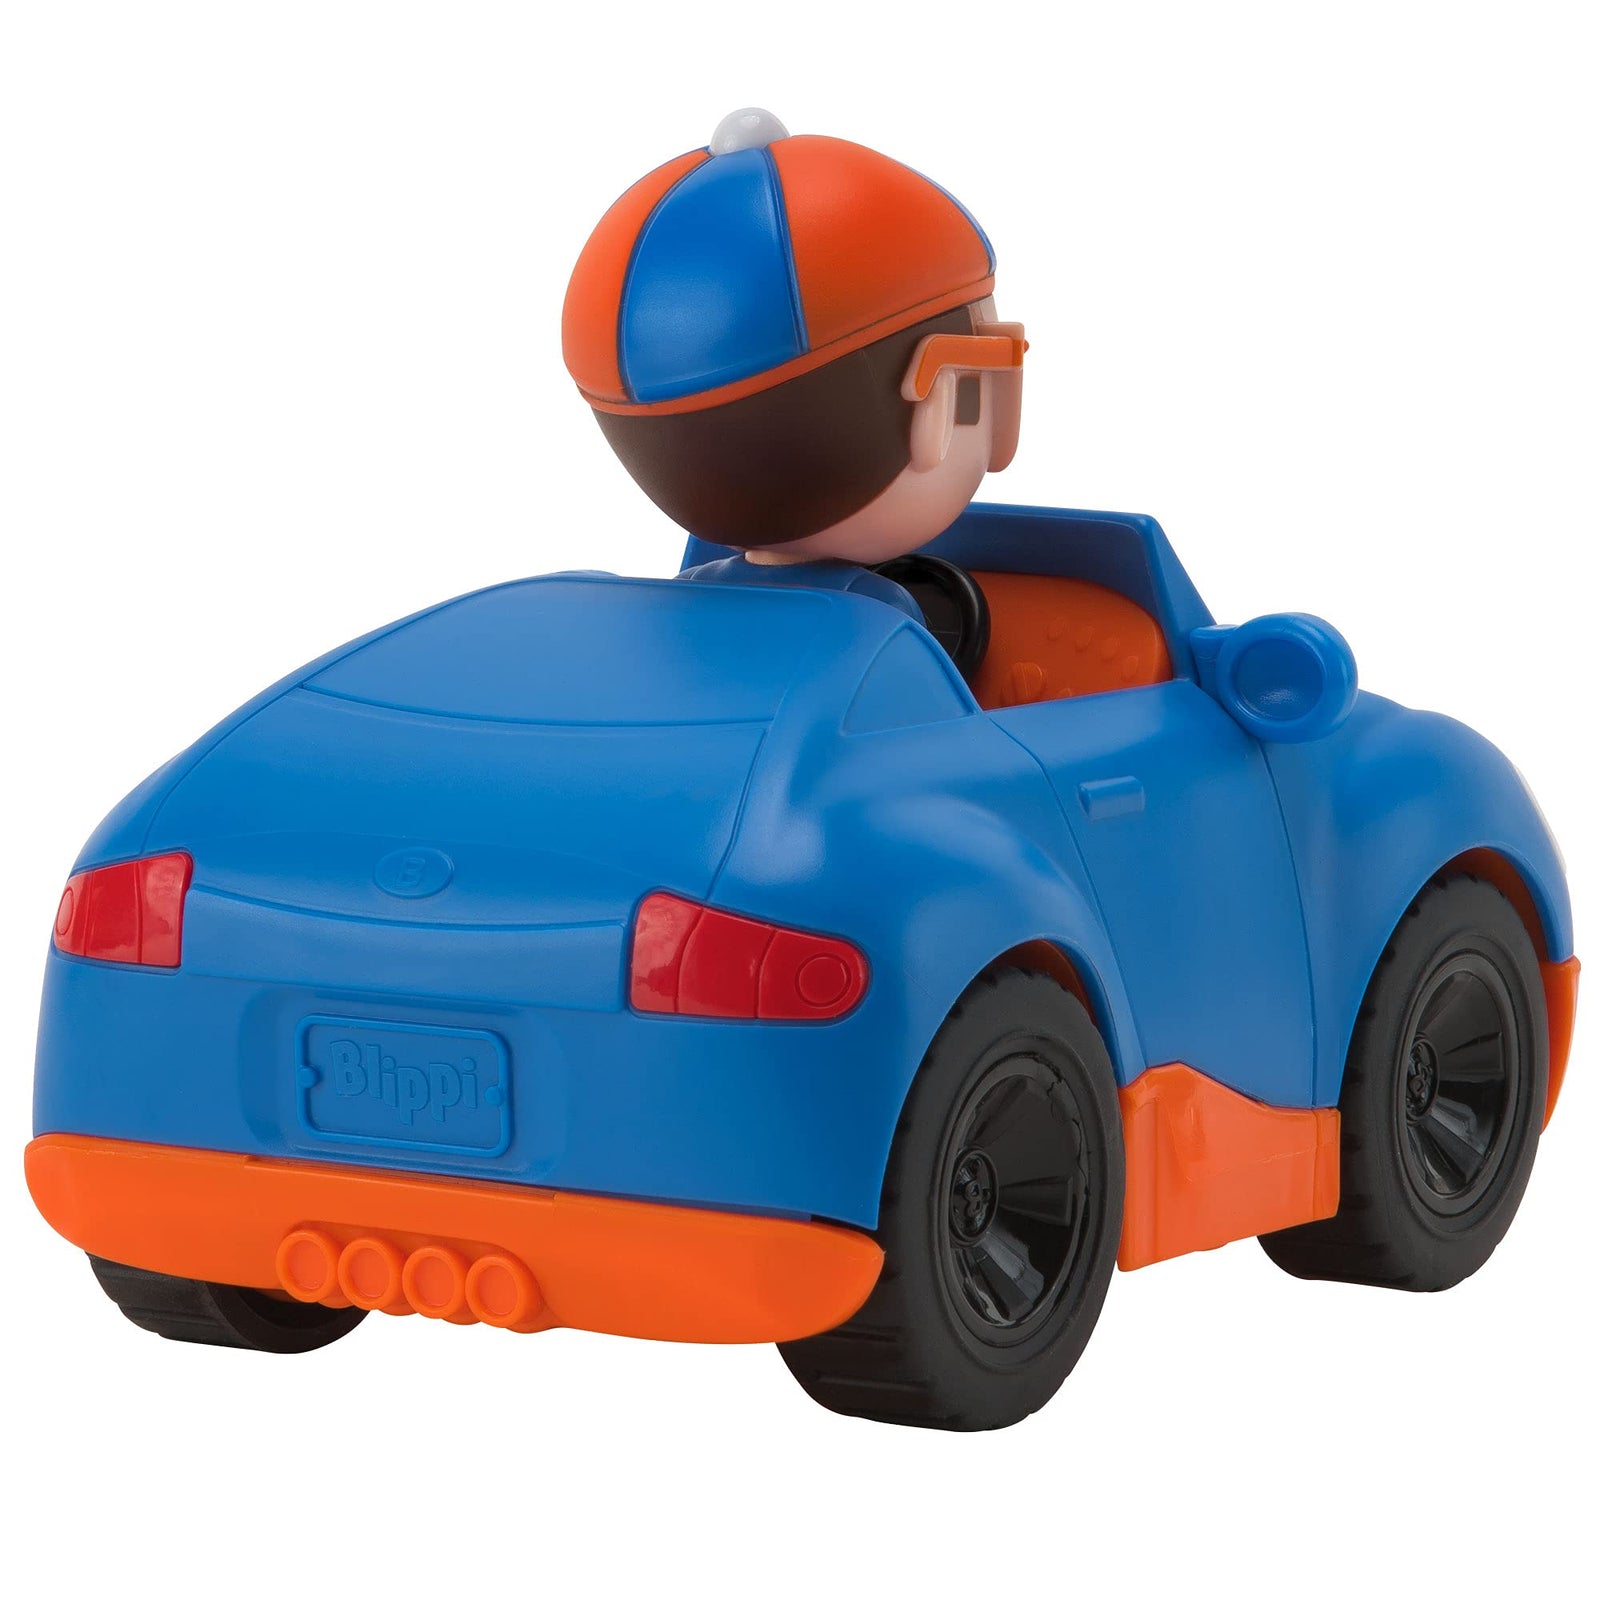 Blippi Racecar - Fun Remote-Controlled Vehicle Seated Inside, Sounds - Educational Vehicles for Toddlers and Young Kids